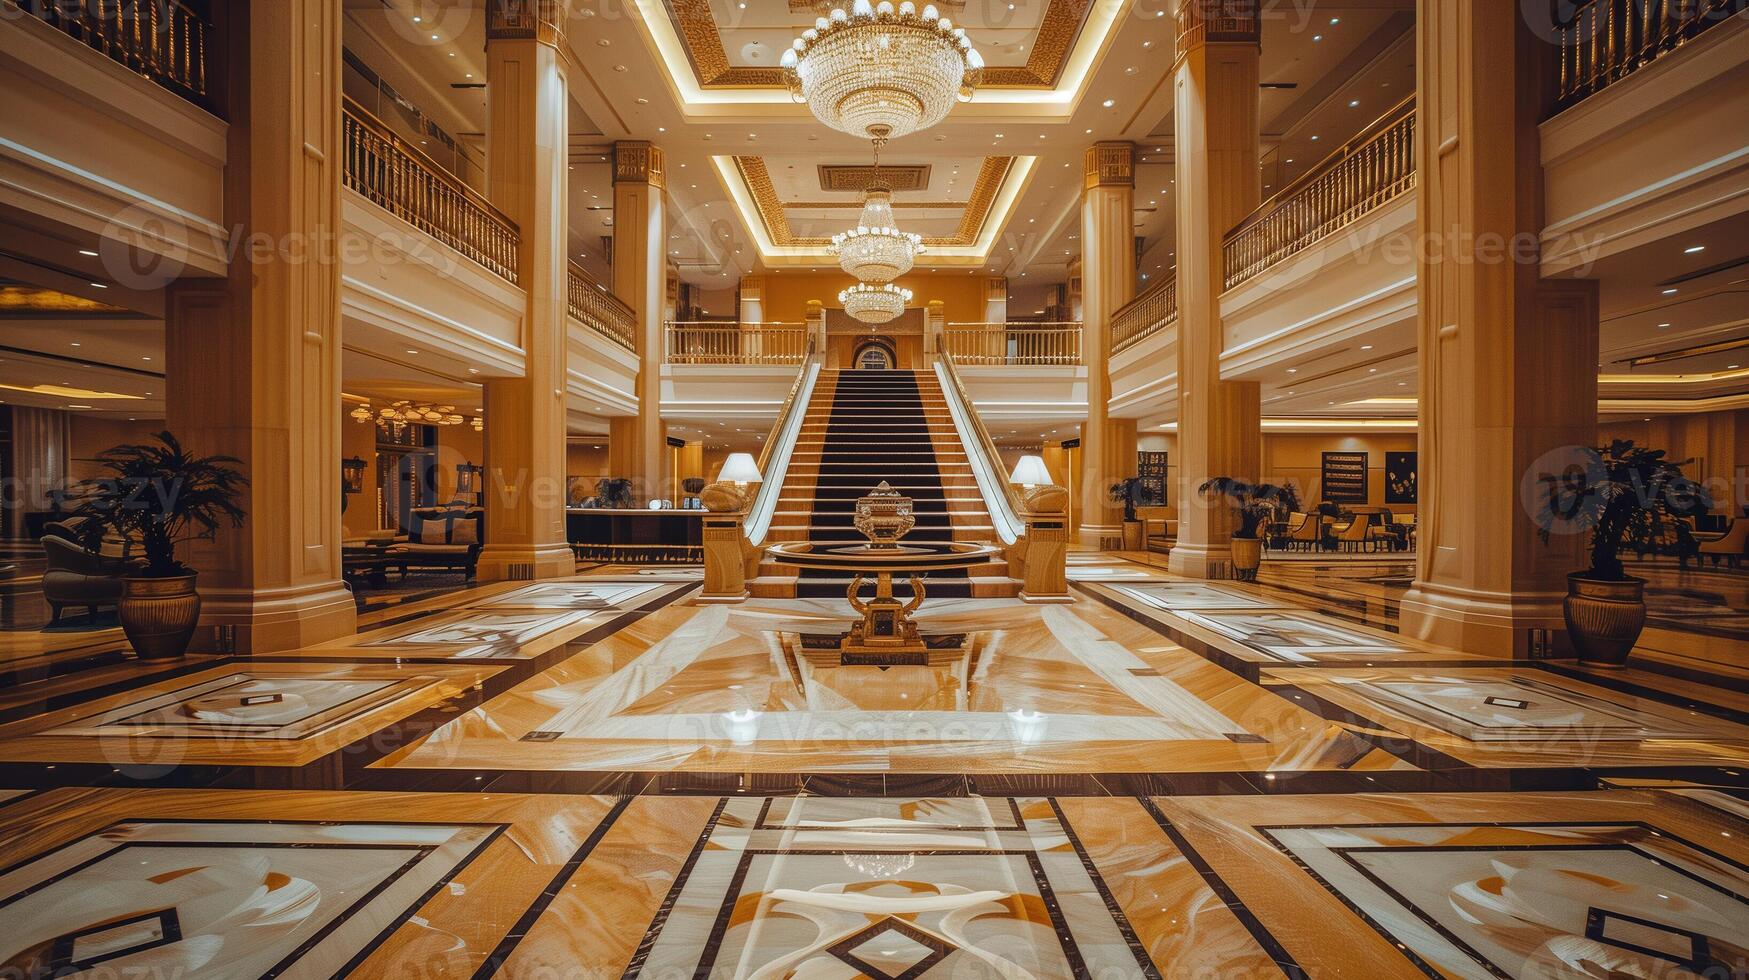 Opulent hotel lobby with grand staircase, chandeliers, and marble floors depicting luxury travel, hospitality industry, and high end real estate concepts photo